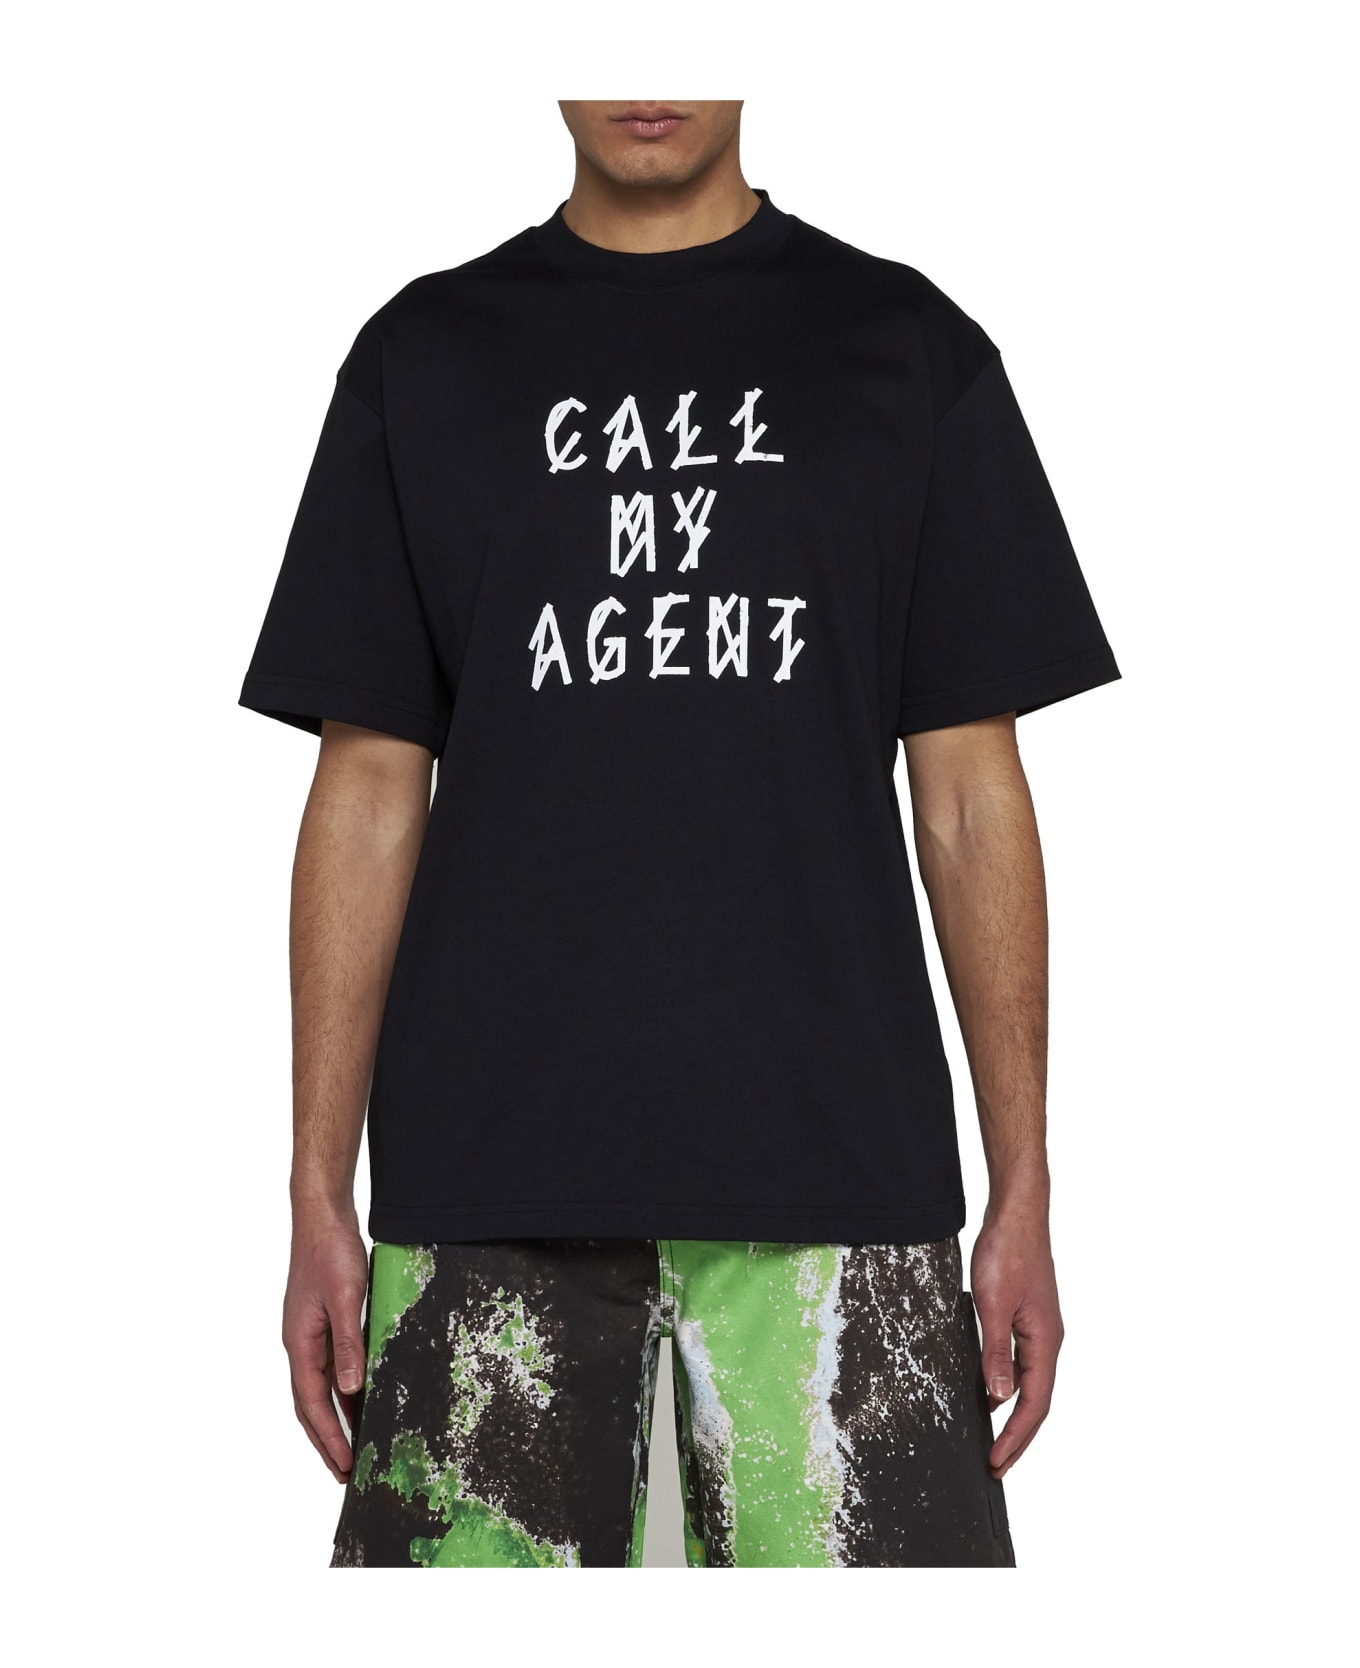 44 Label Group T-Shirt - Black+call my agent